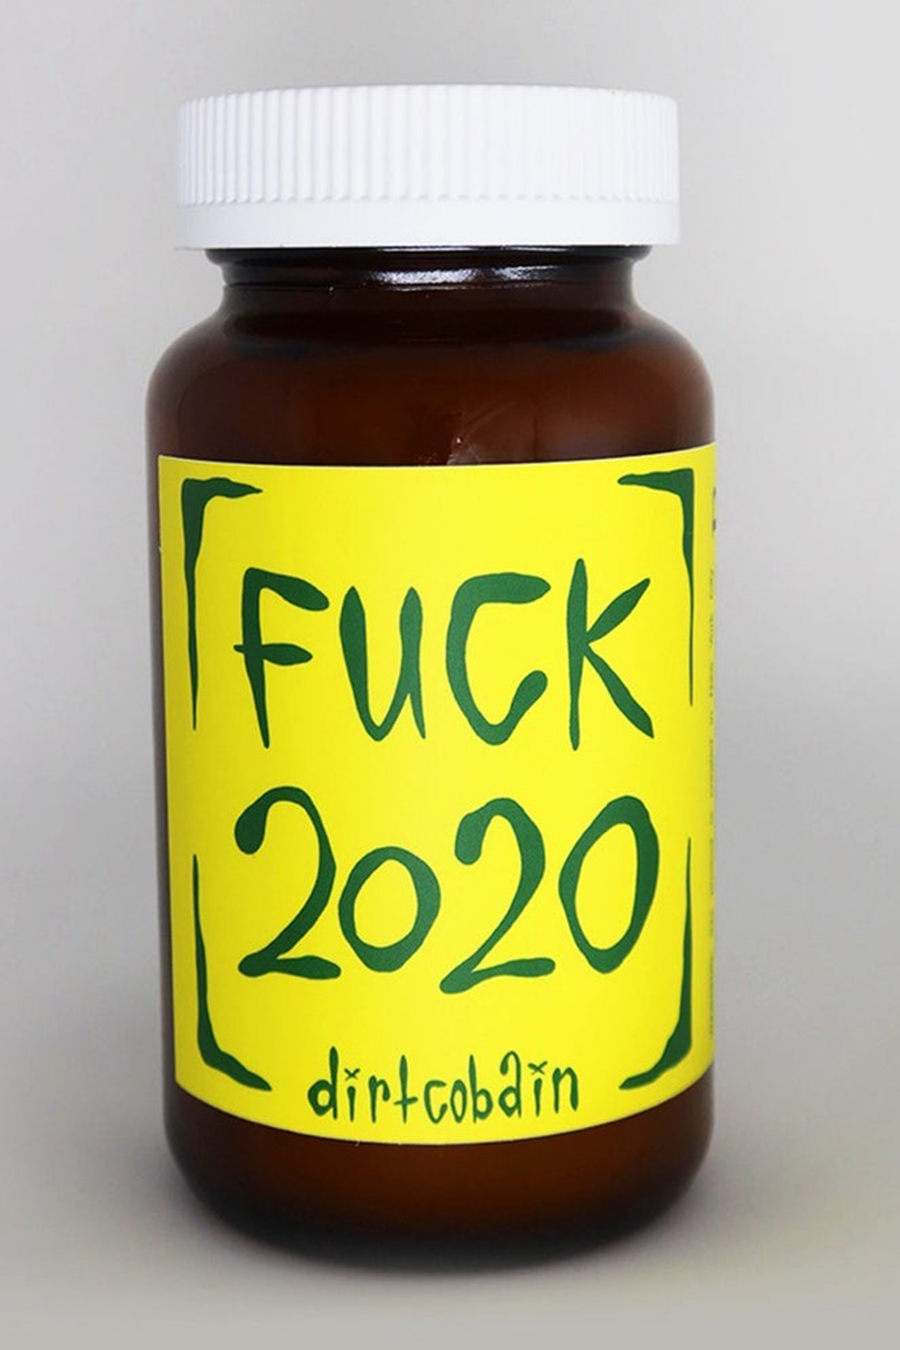 Fuck 2020 Candle - Main Image Number 1 of 1